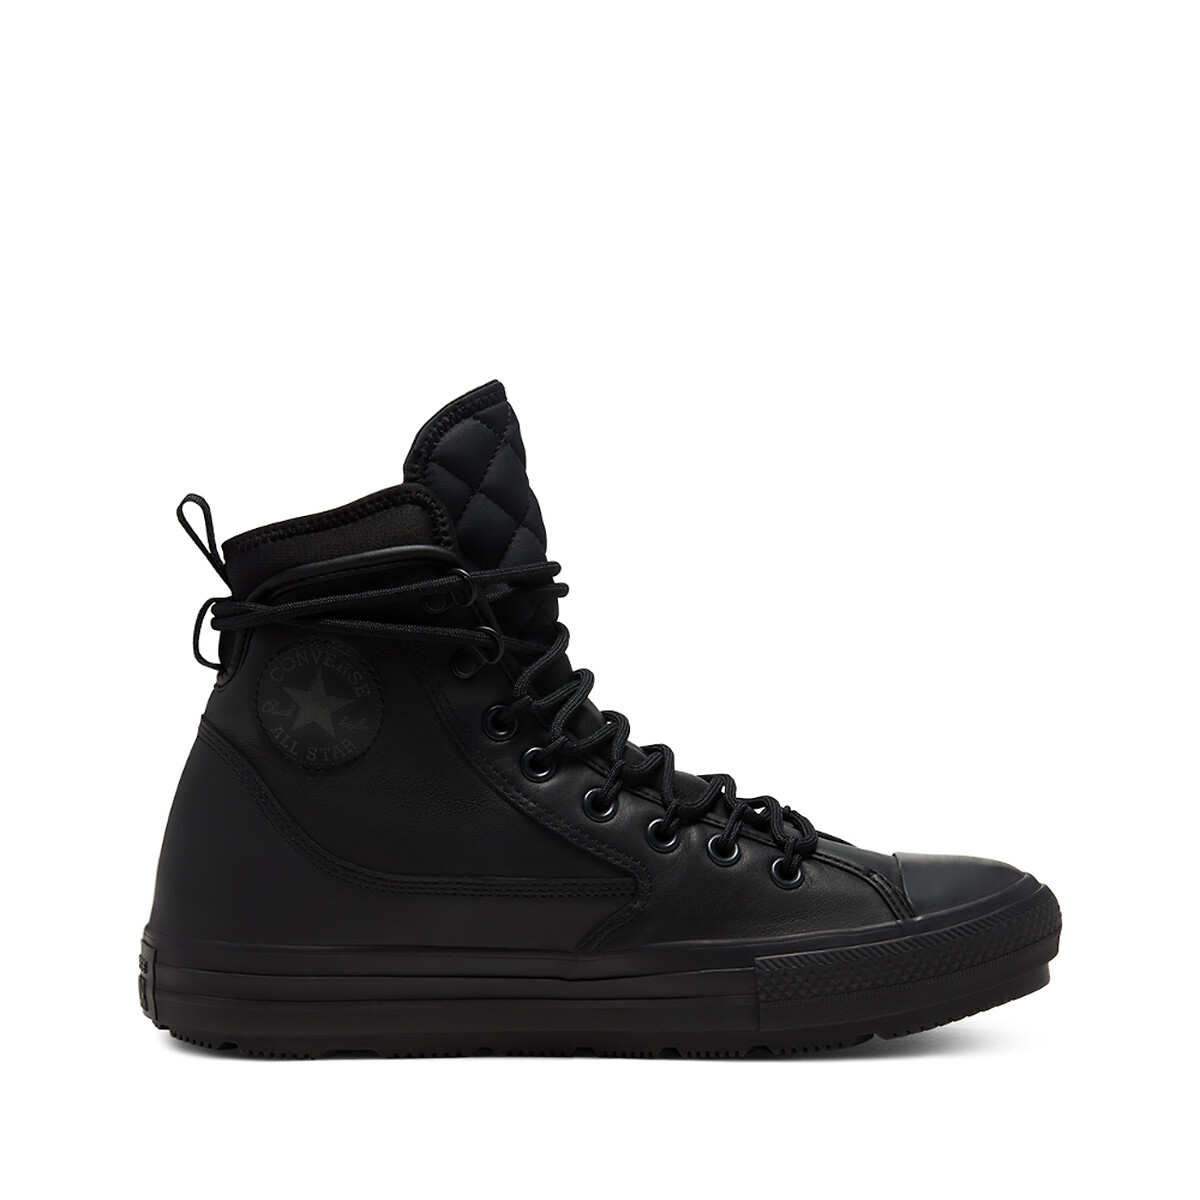 Image of Chuck Taylor All Terrain Utility High Top Trainers in Leather